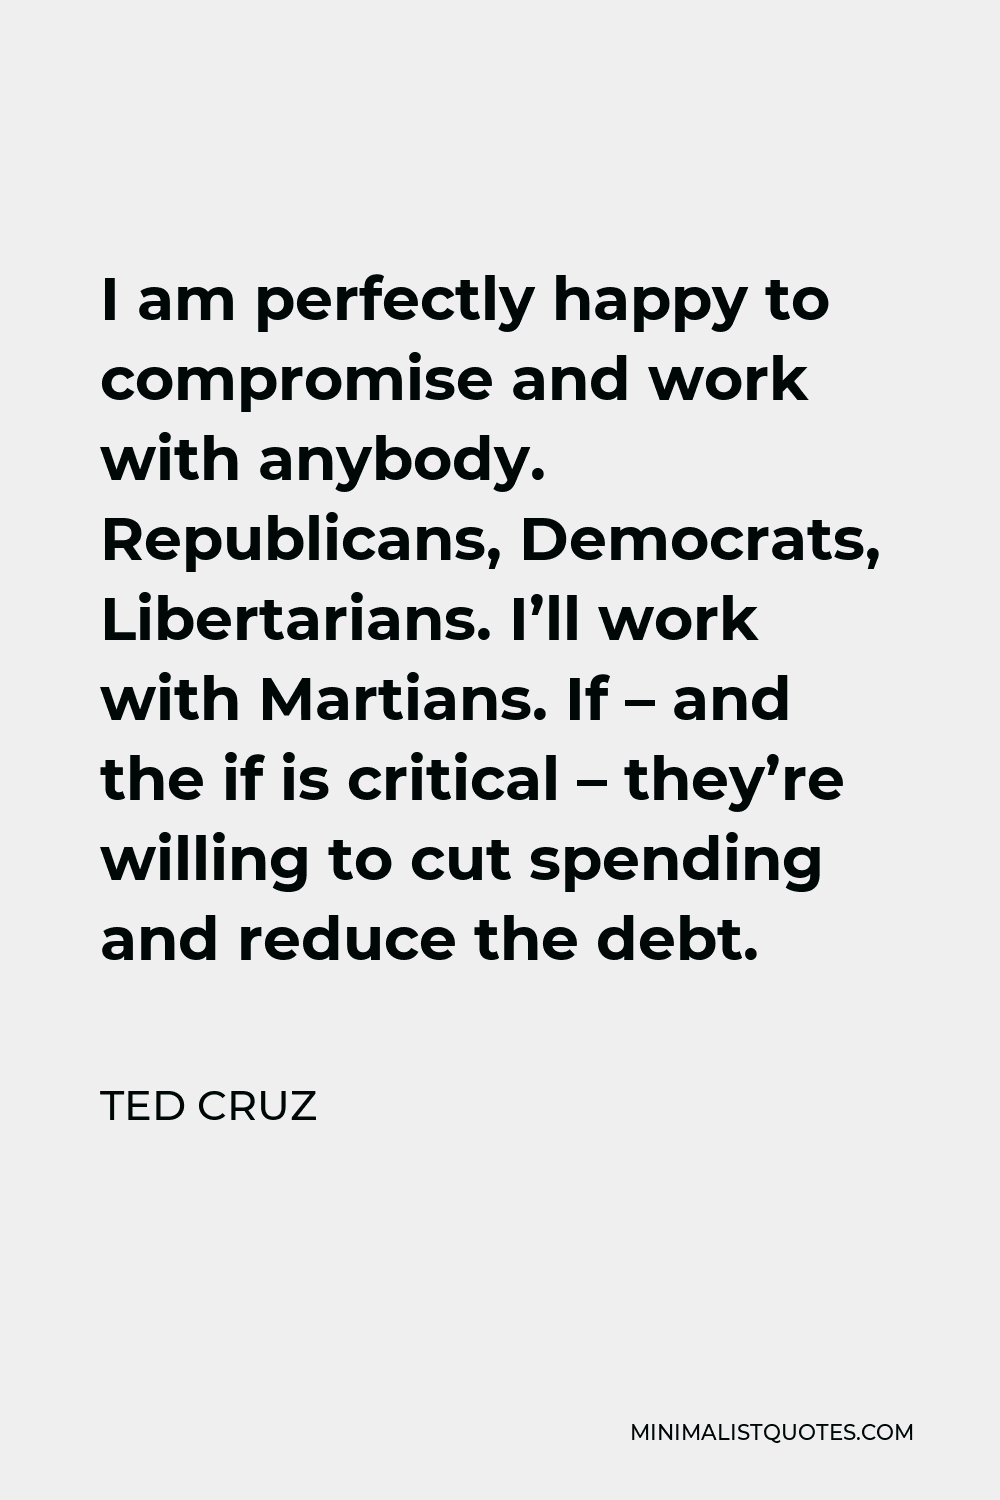 Ted Cruz Quote - I am perfectly happy to compromise and work with anybody. Republicans, Democrats, Libertarians. I’ll work with Martians. If – and the if is critical – they’re willing to cut spending and reduce the debt.